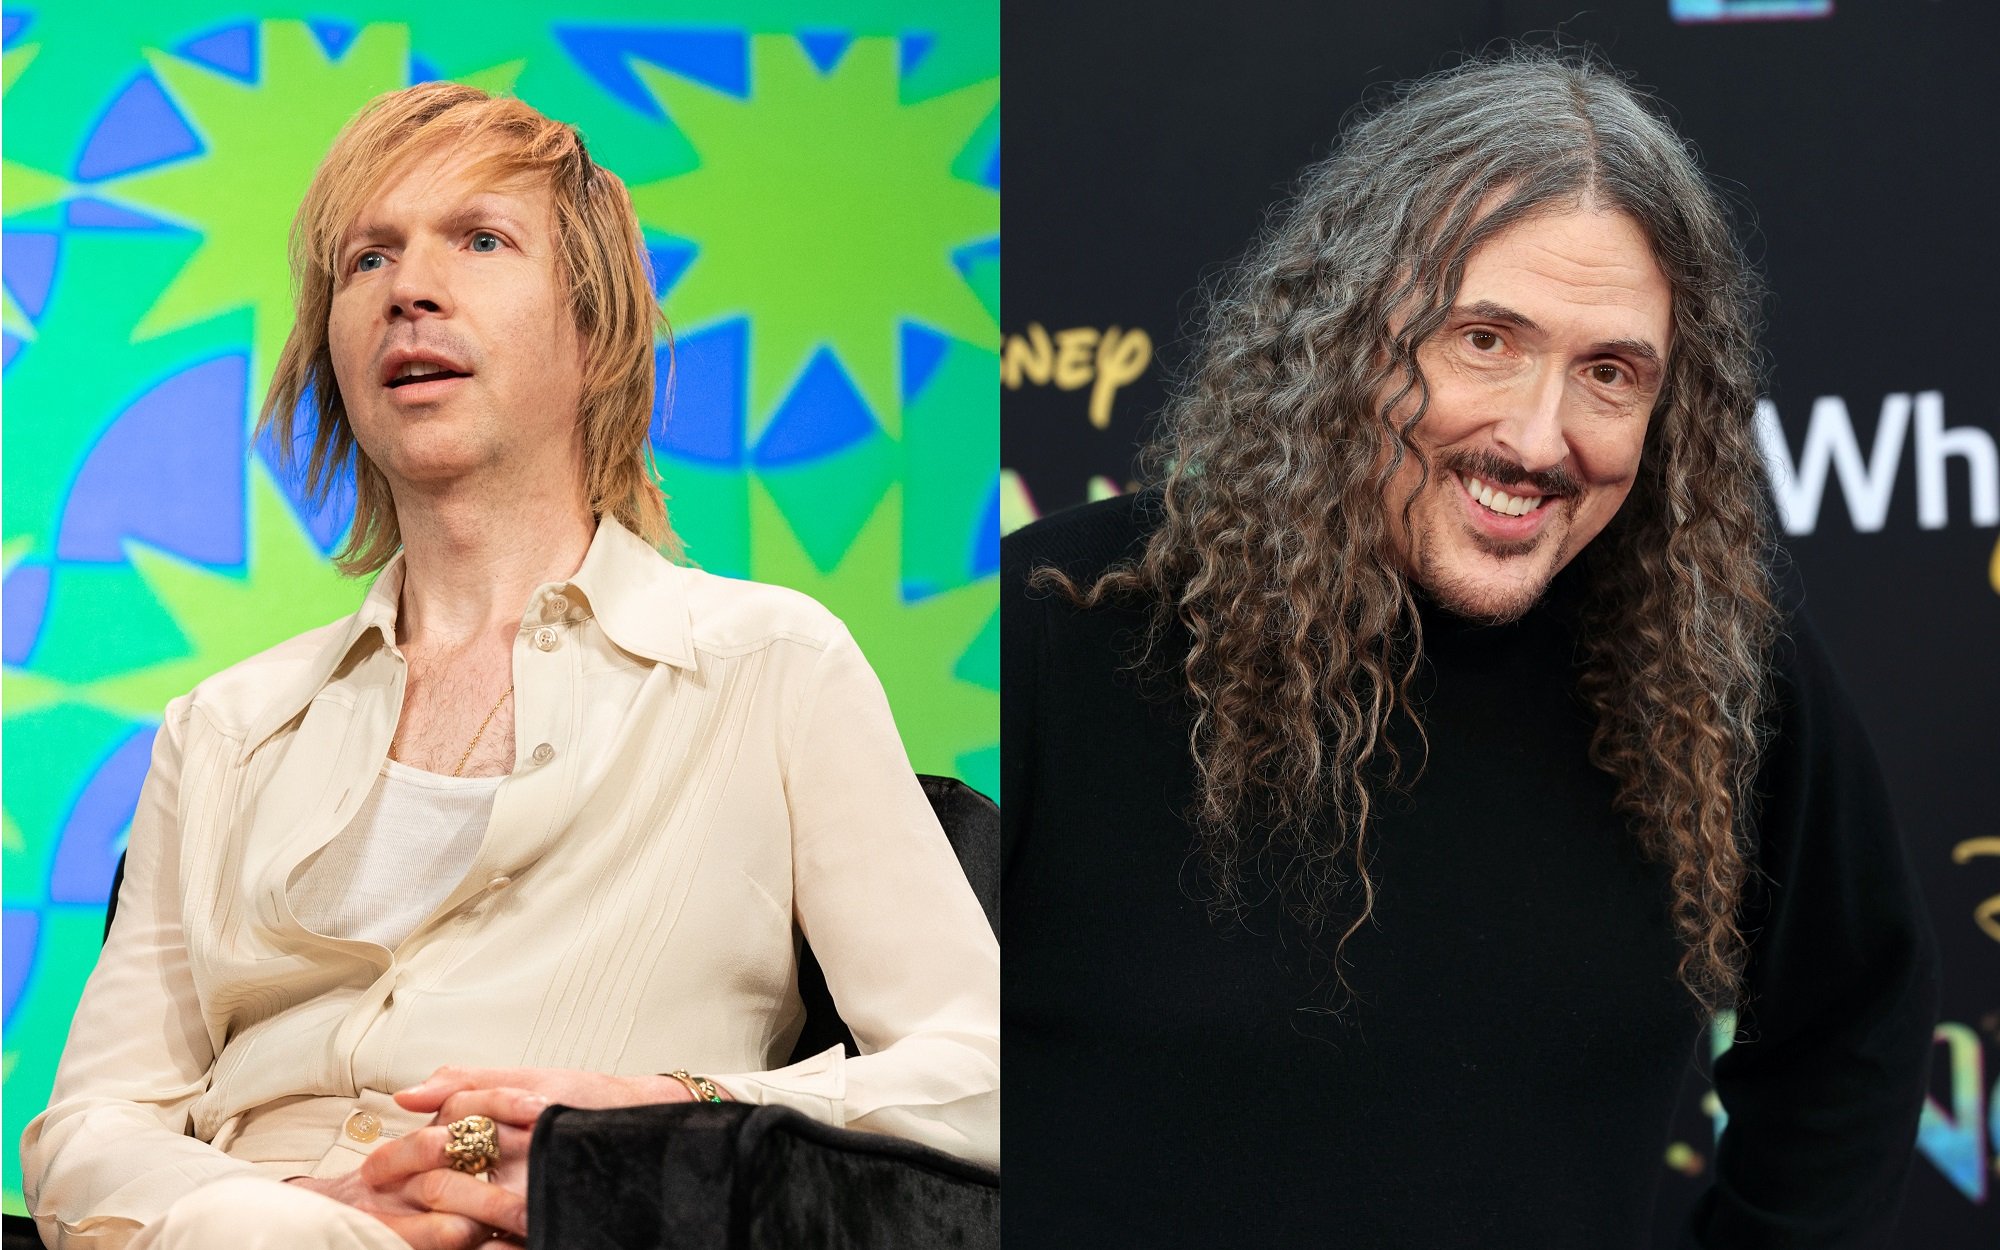 A joined photo of Beck and 'Weird Al' Yankovic